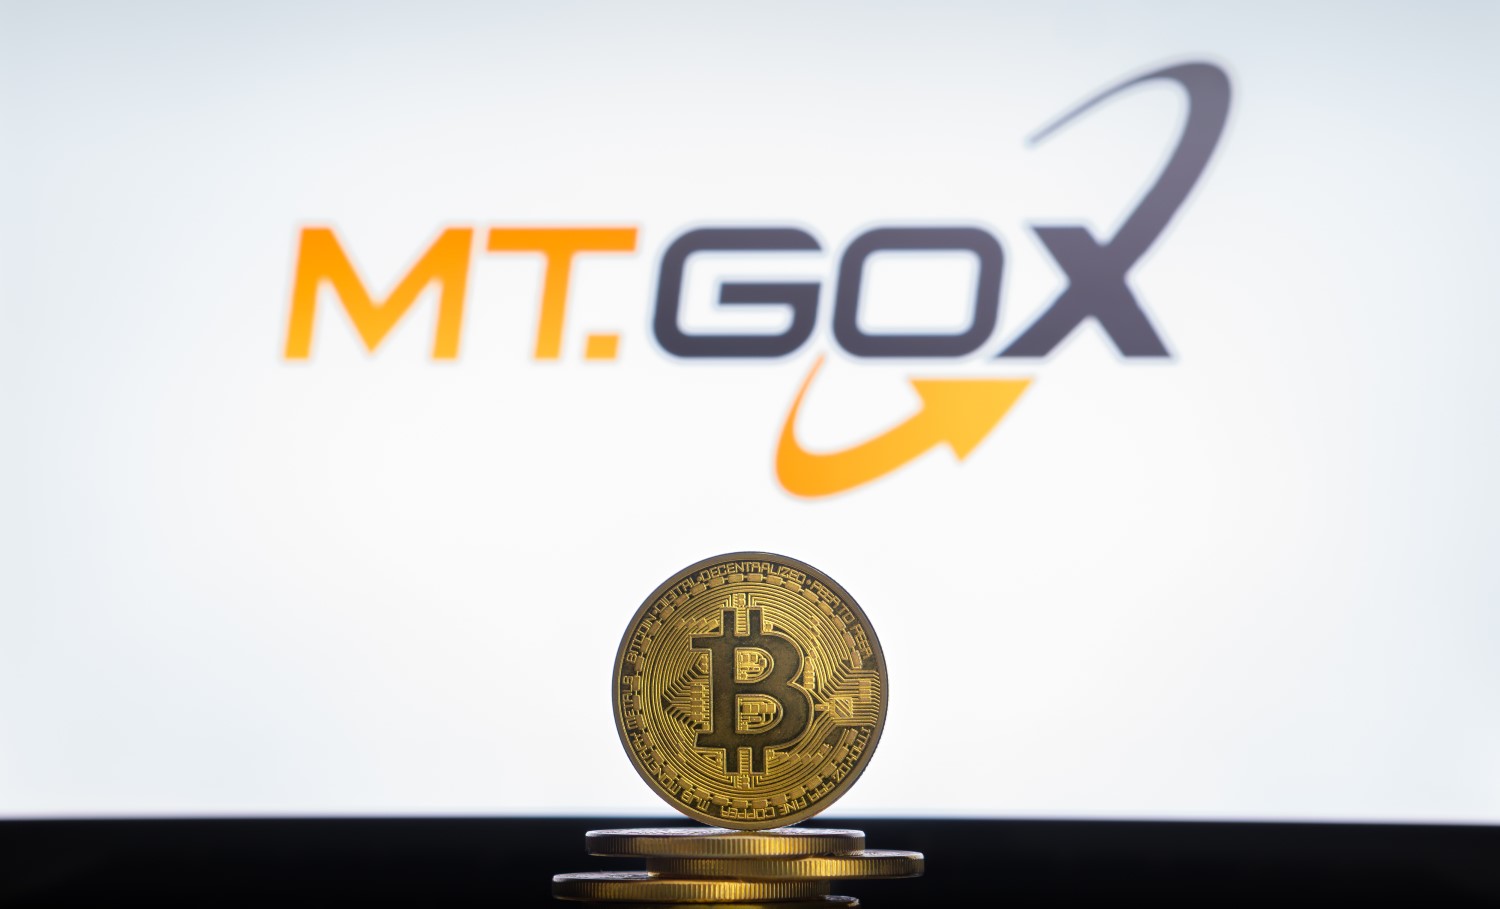 Investment Giant Fortress Issues New, Lower Buyout Offer For Mt Gox Creditor Claims